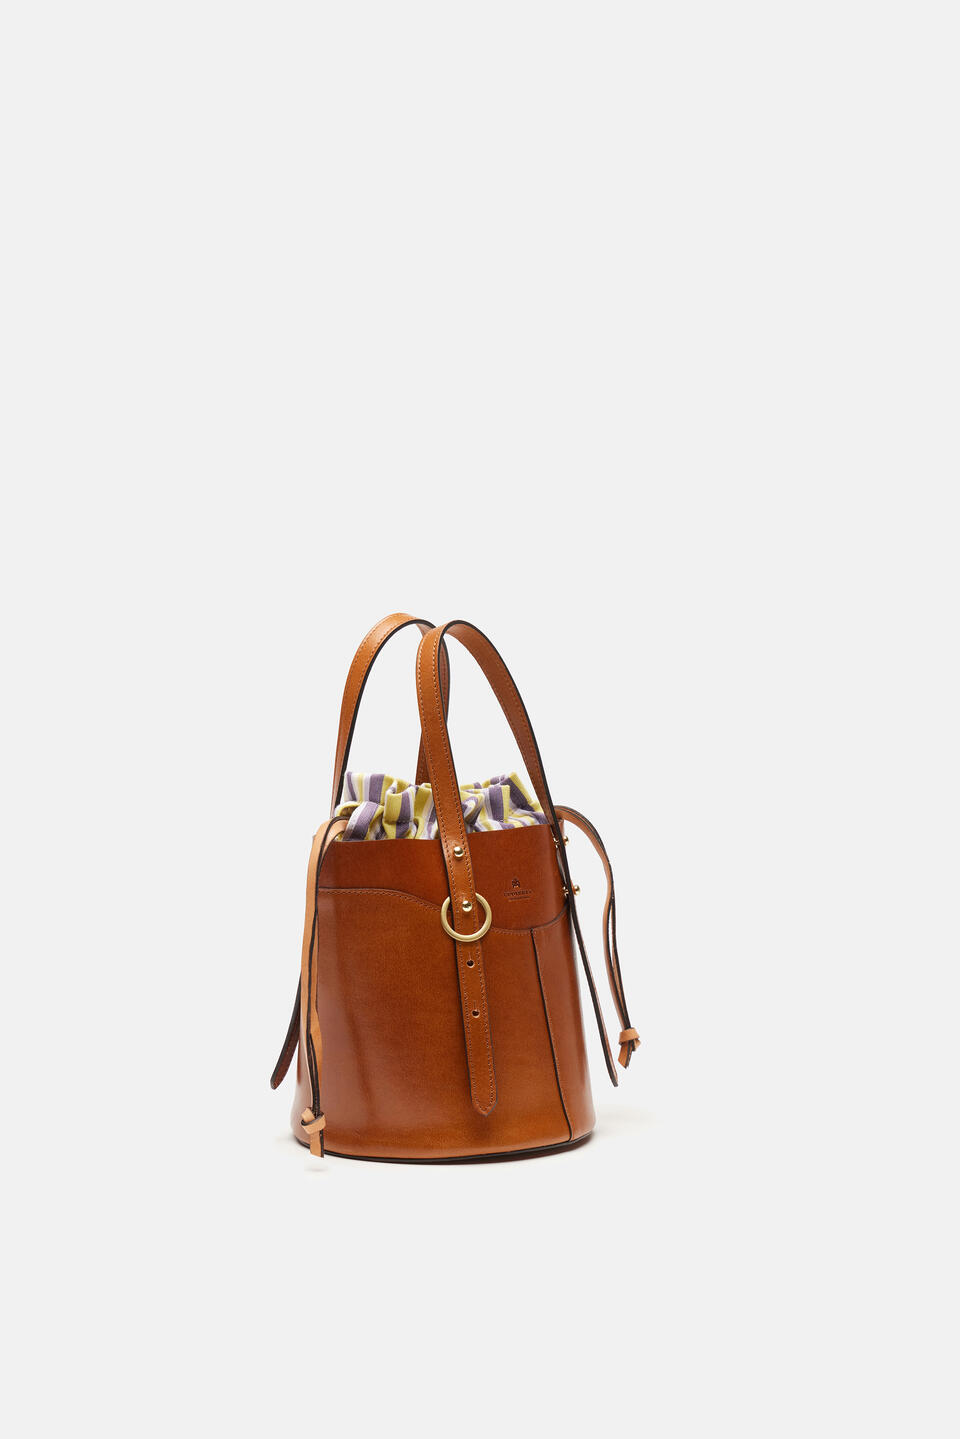 SMALL BUCKET Natural  - Bucket Bags - Women's Bags - Bags - Cuoieria Fiorentina